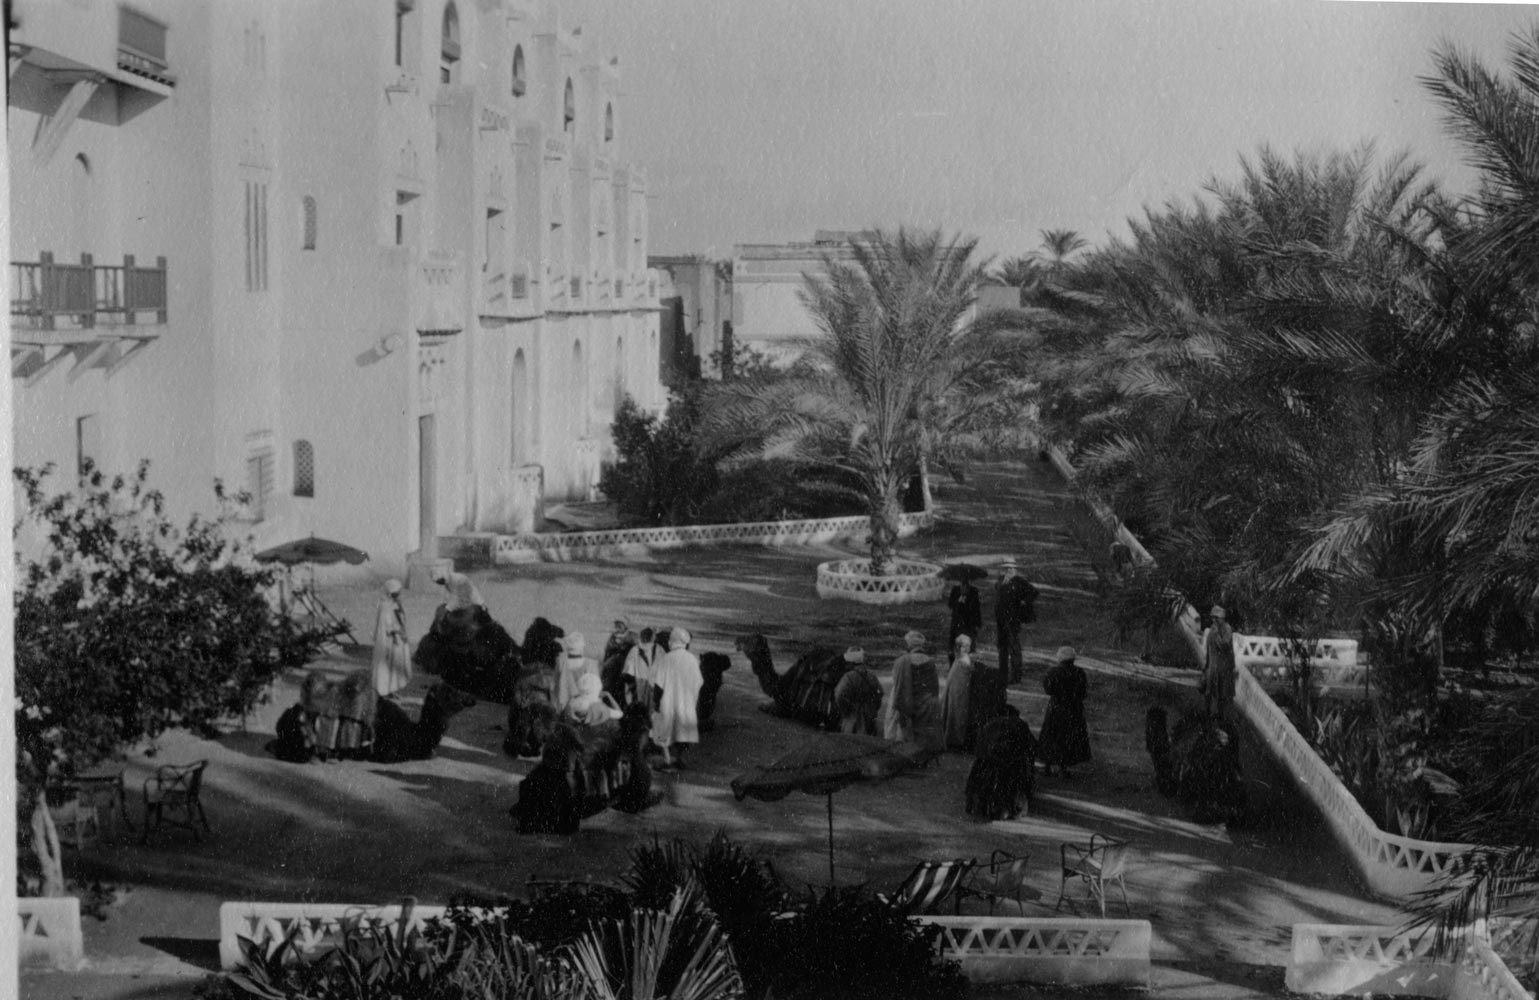 View of camels in the courtyard